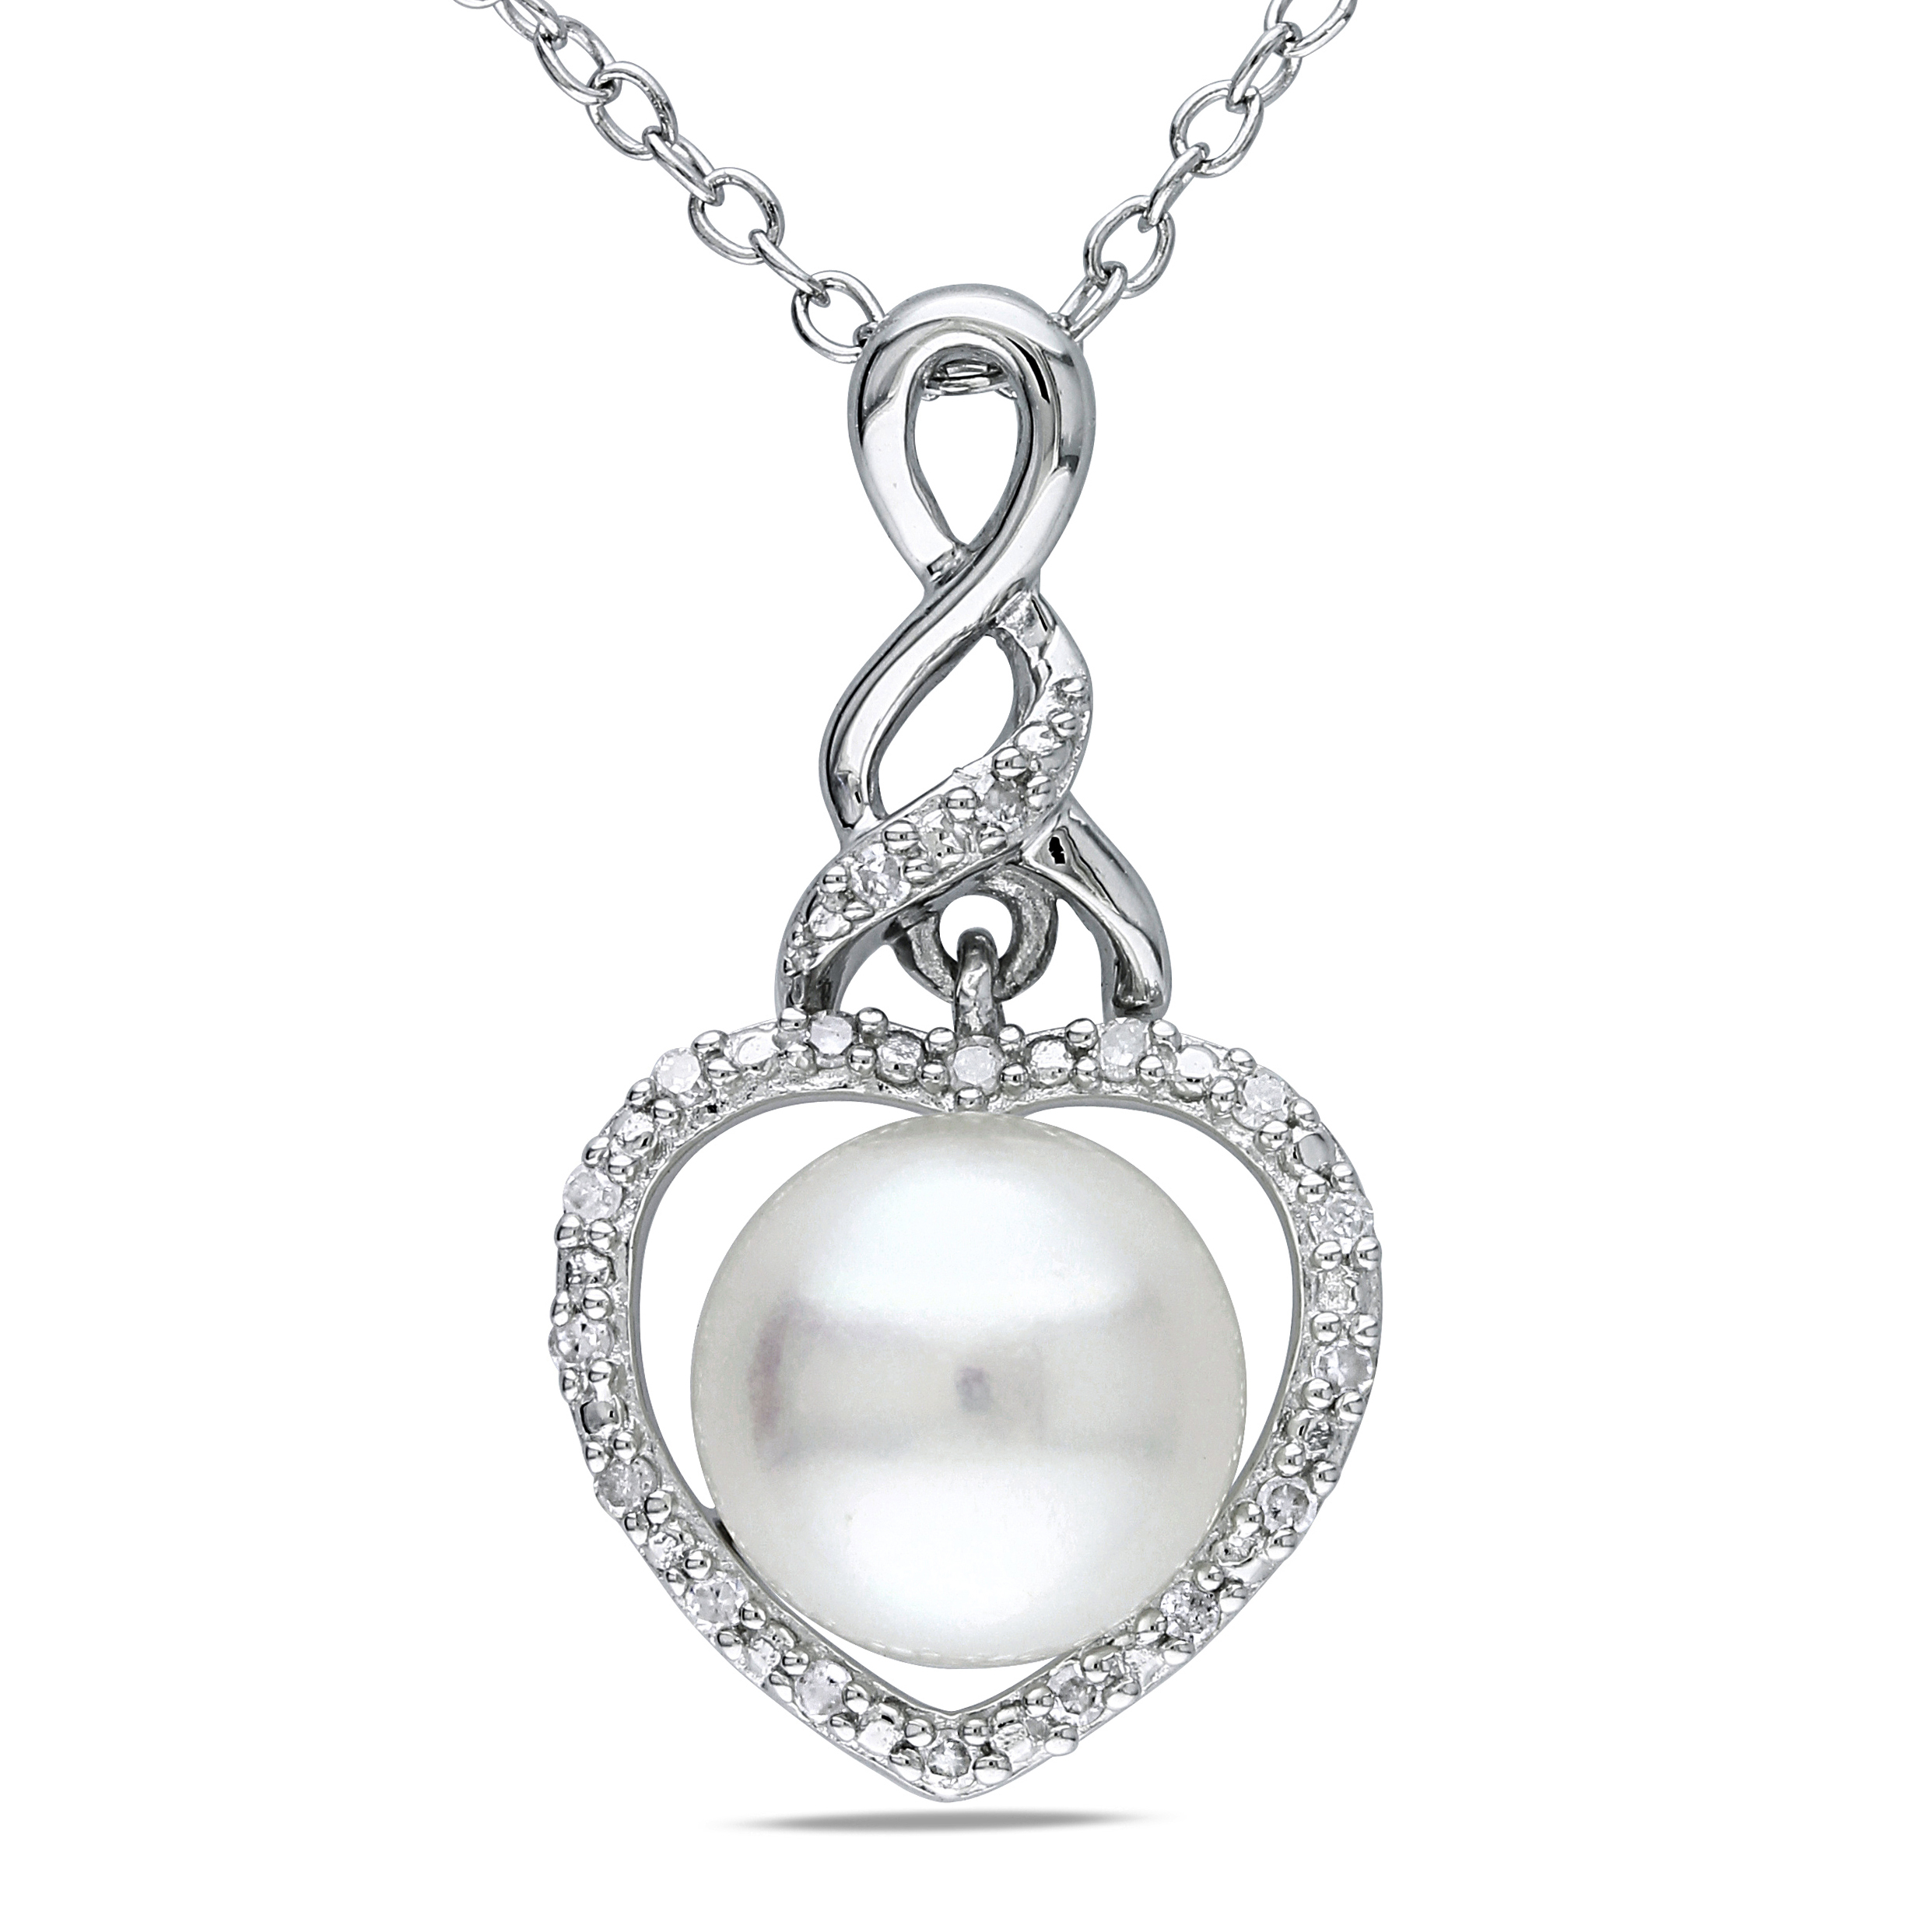 8 - 8.5 MM White Cultured Freshwater Pearl and Diamond Heart Pendant with Chain in Sterling Silver